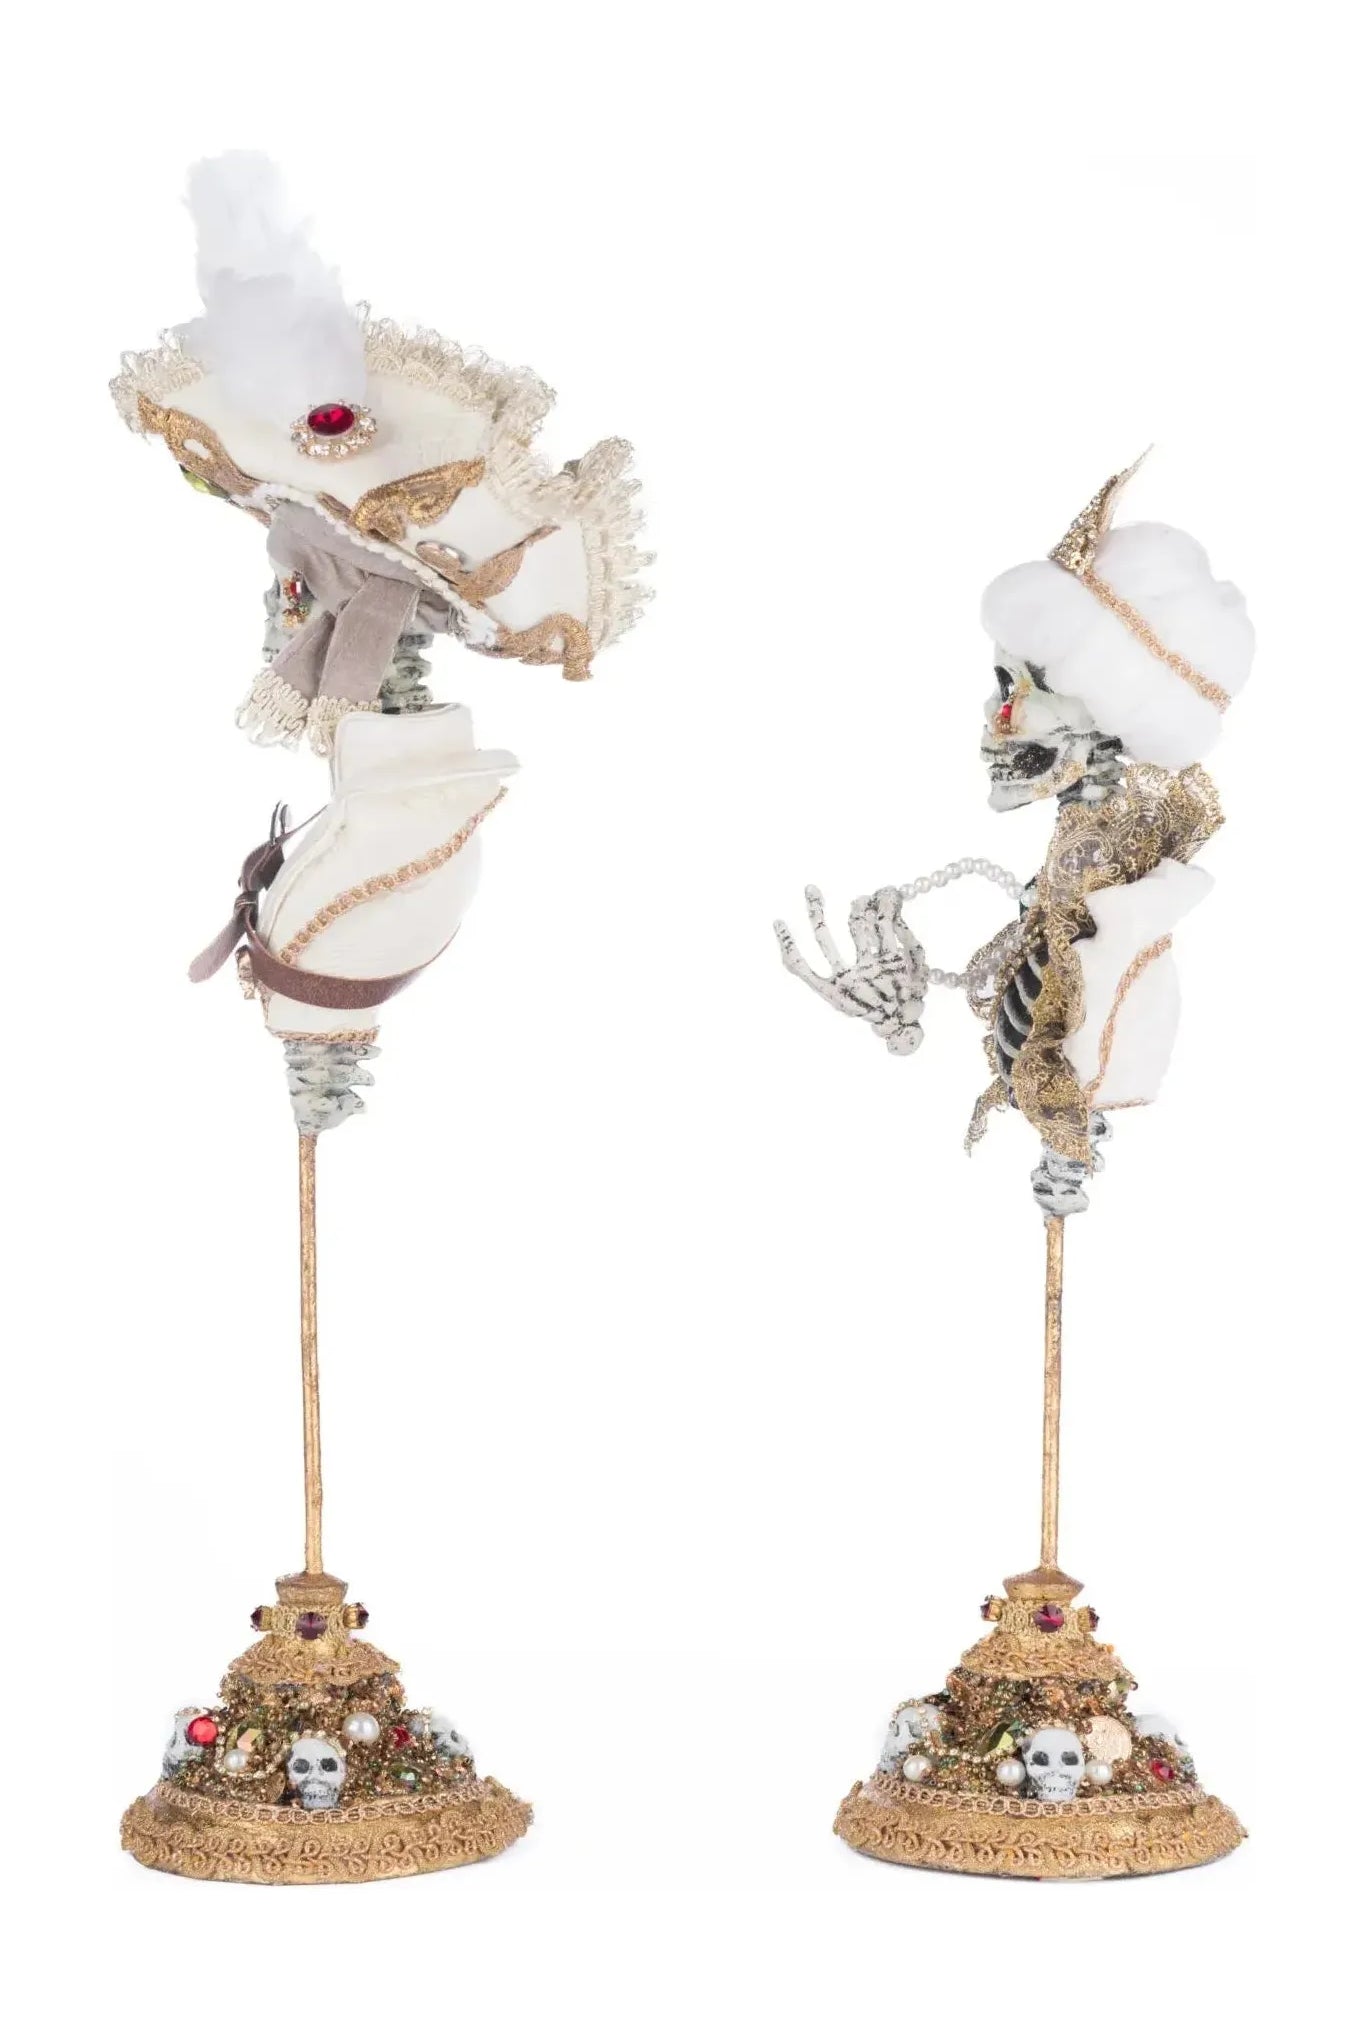 Shop For Male and Female Skeleton Bust Tabletop Assortment of 2 28-428223